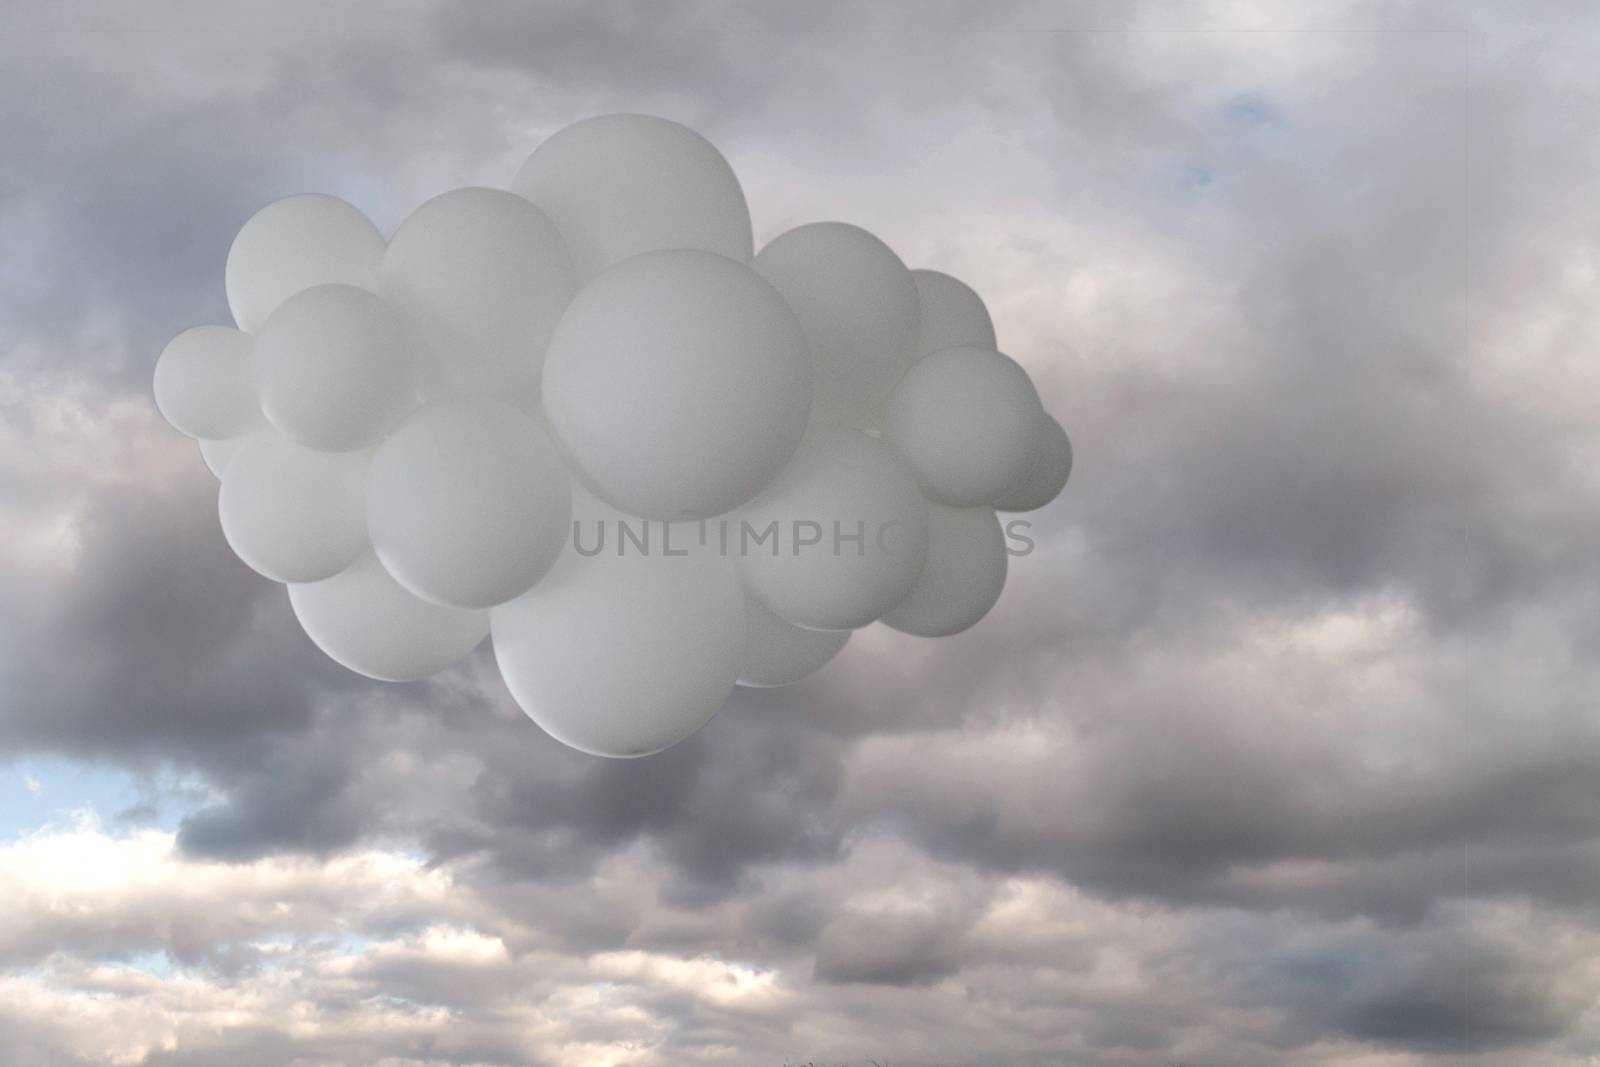 White helium balloons on a cloudy sky background. by fogen